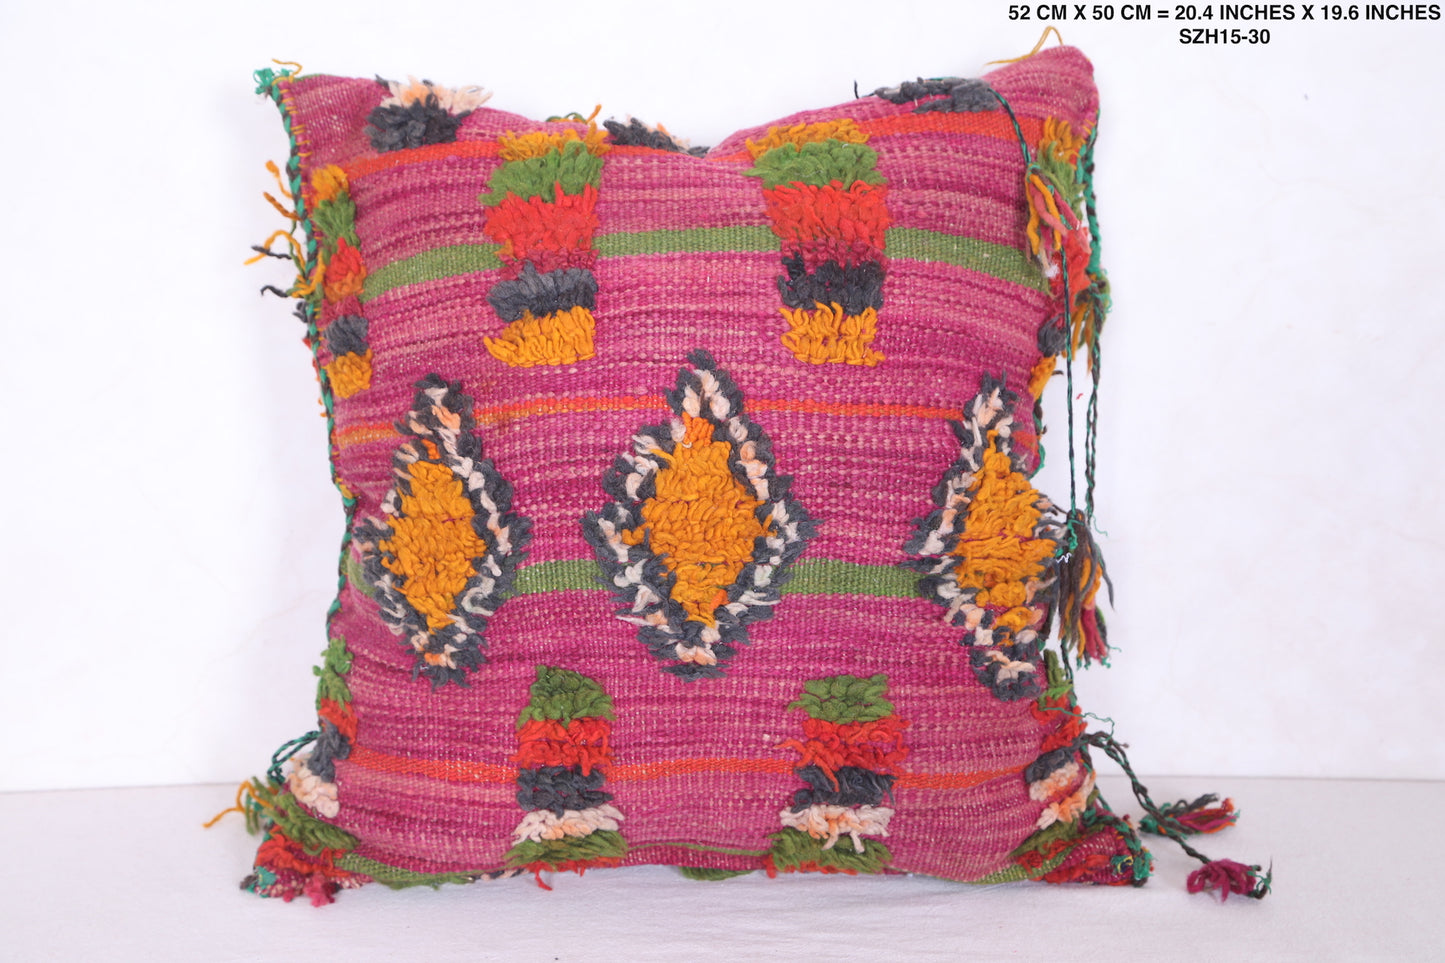 Moroccan handmade rug pillows 20.4 INCHES X 19.6 INCHES